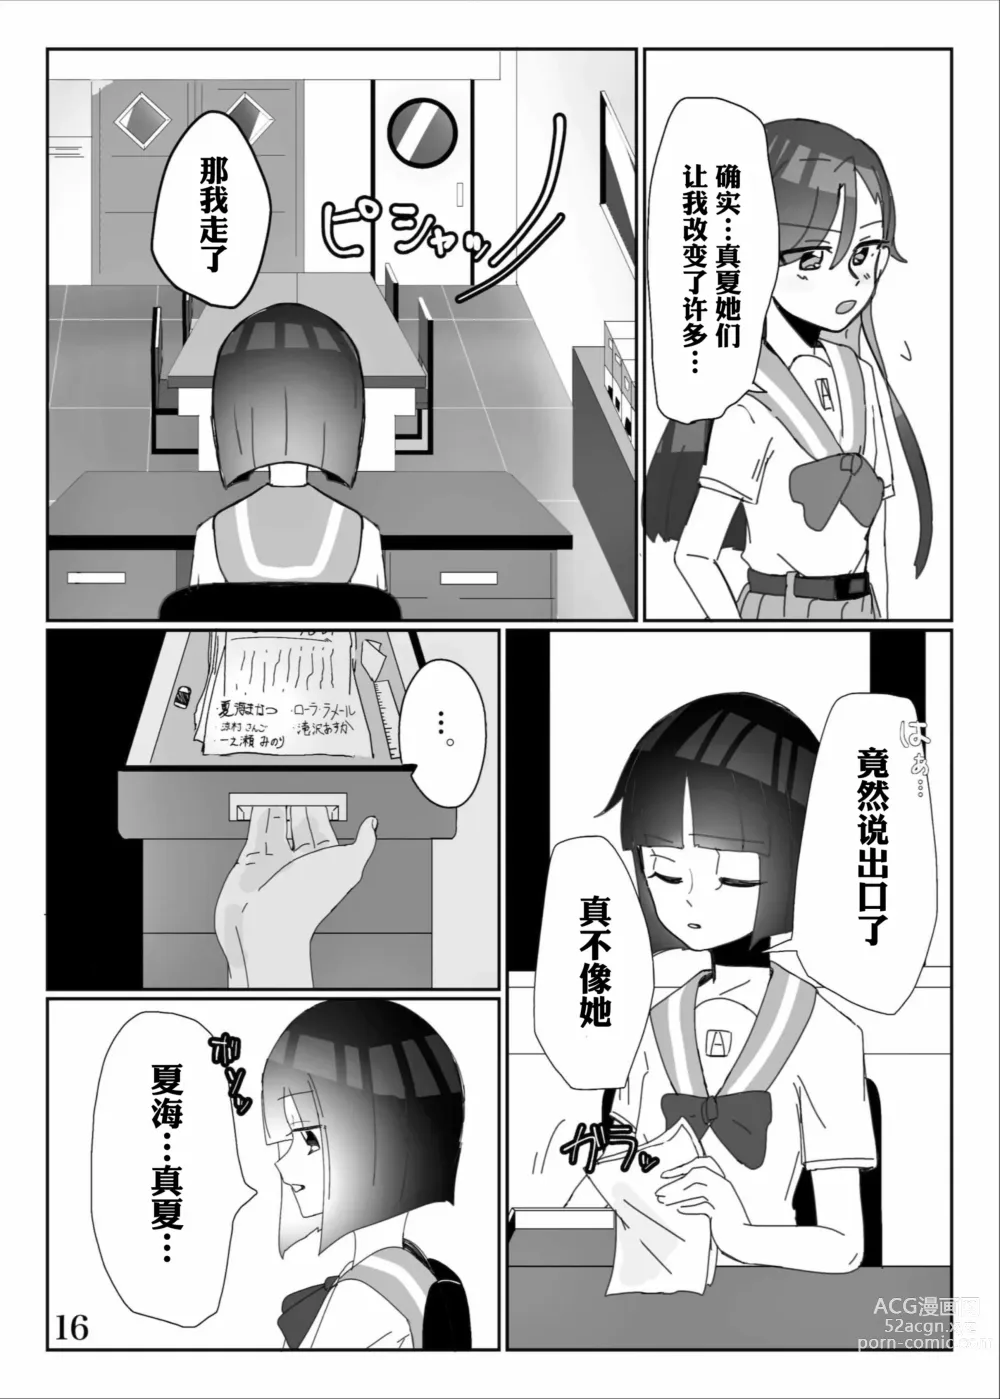 Page 18 of doujinshi 想做能干的孩子♪ DO MY BEST!